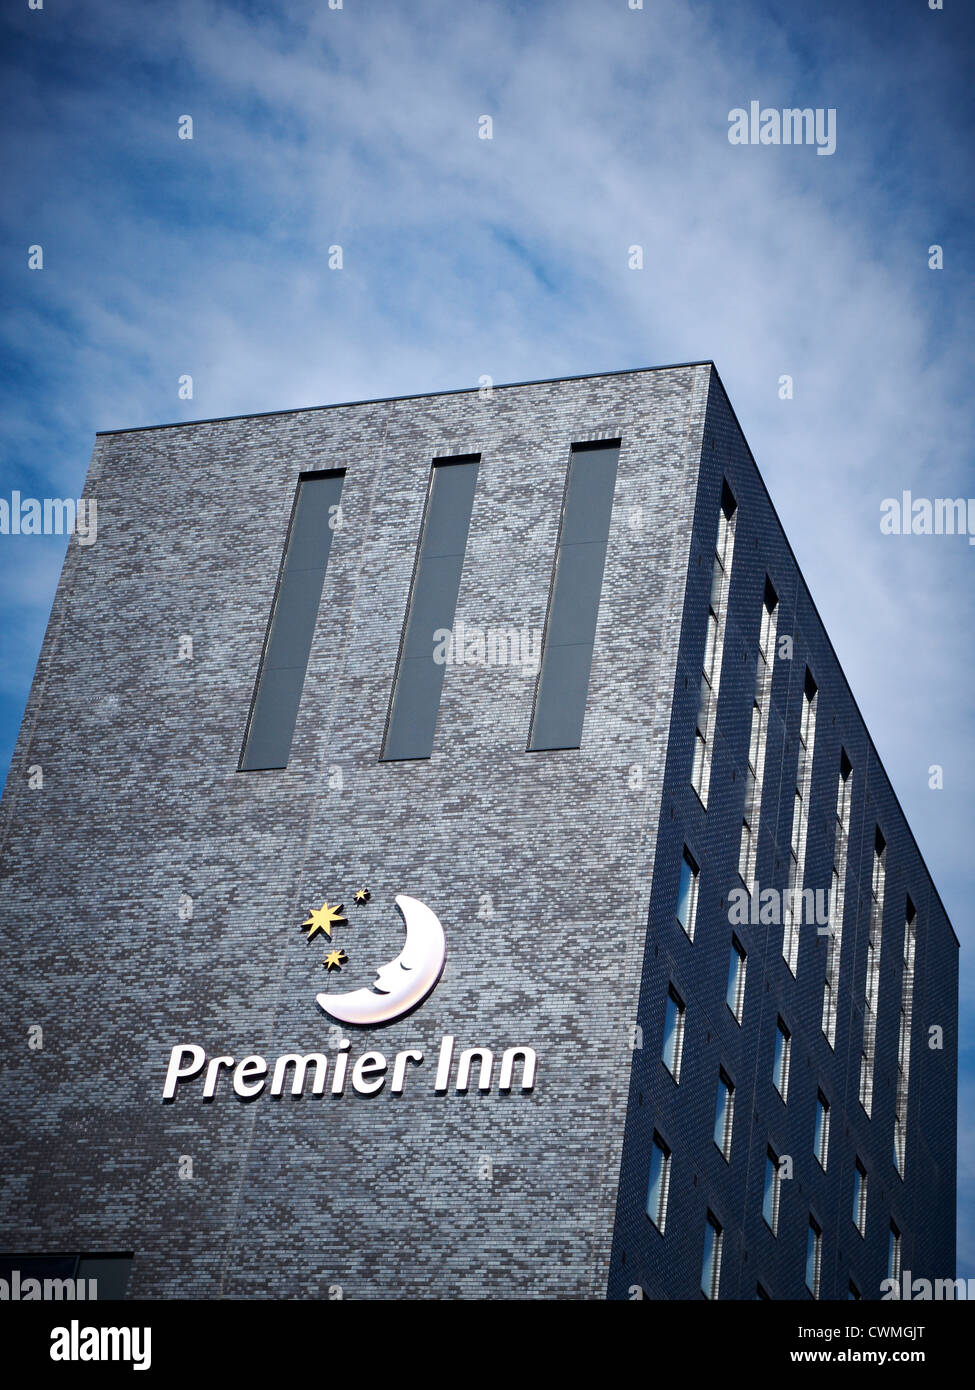 Premier Inn Hotel showing company sign or logo on Piccadilly, Dale Street in Manchester UK Stock Photo